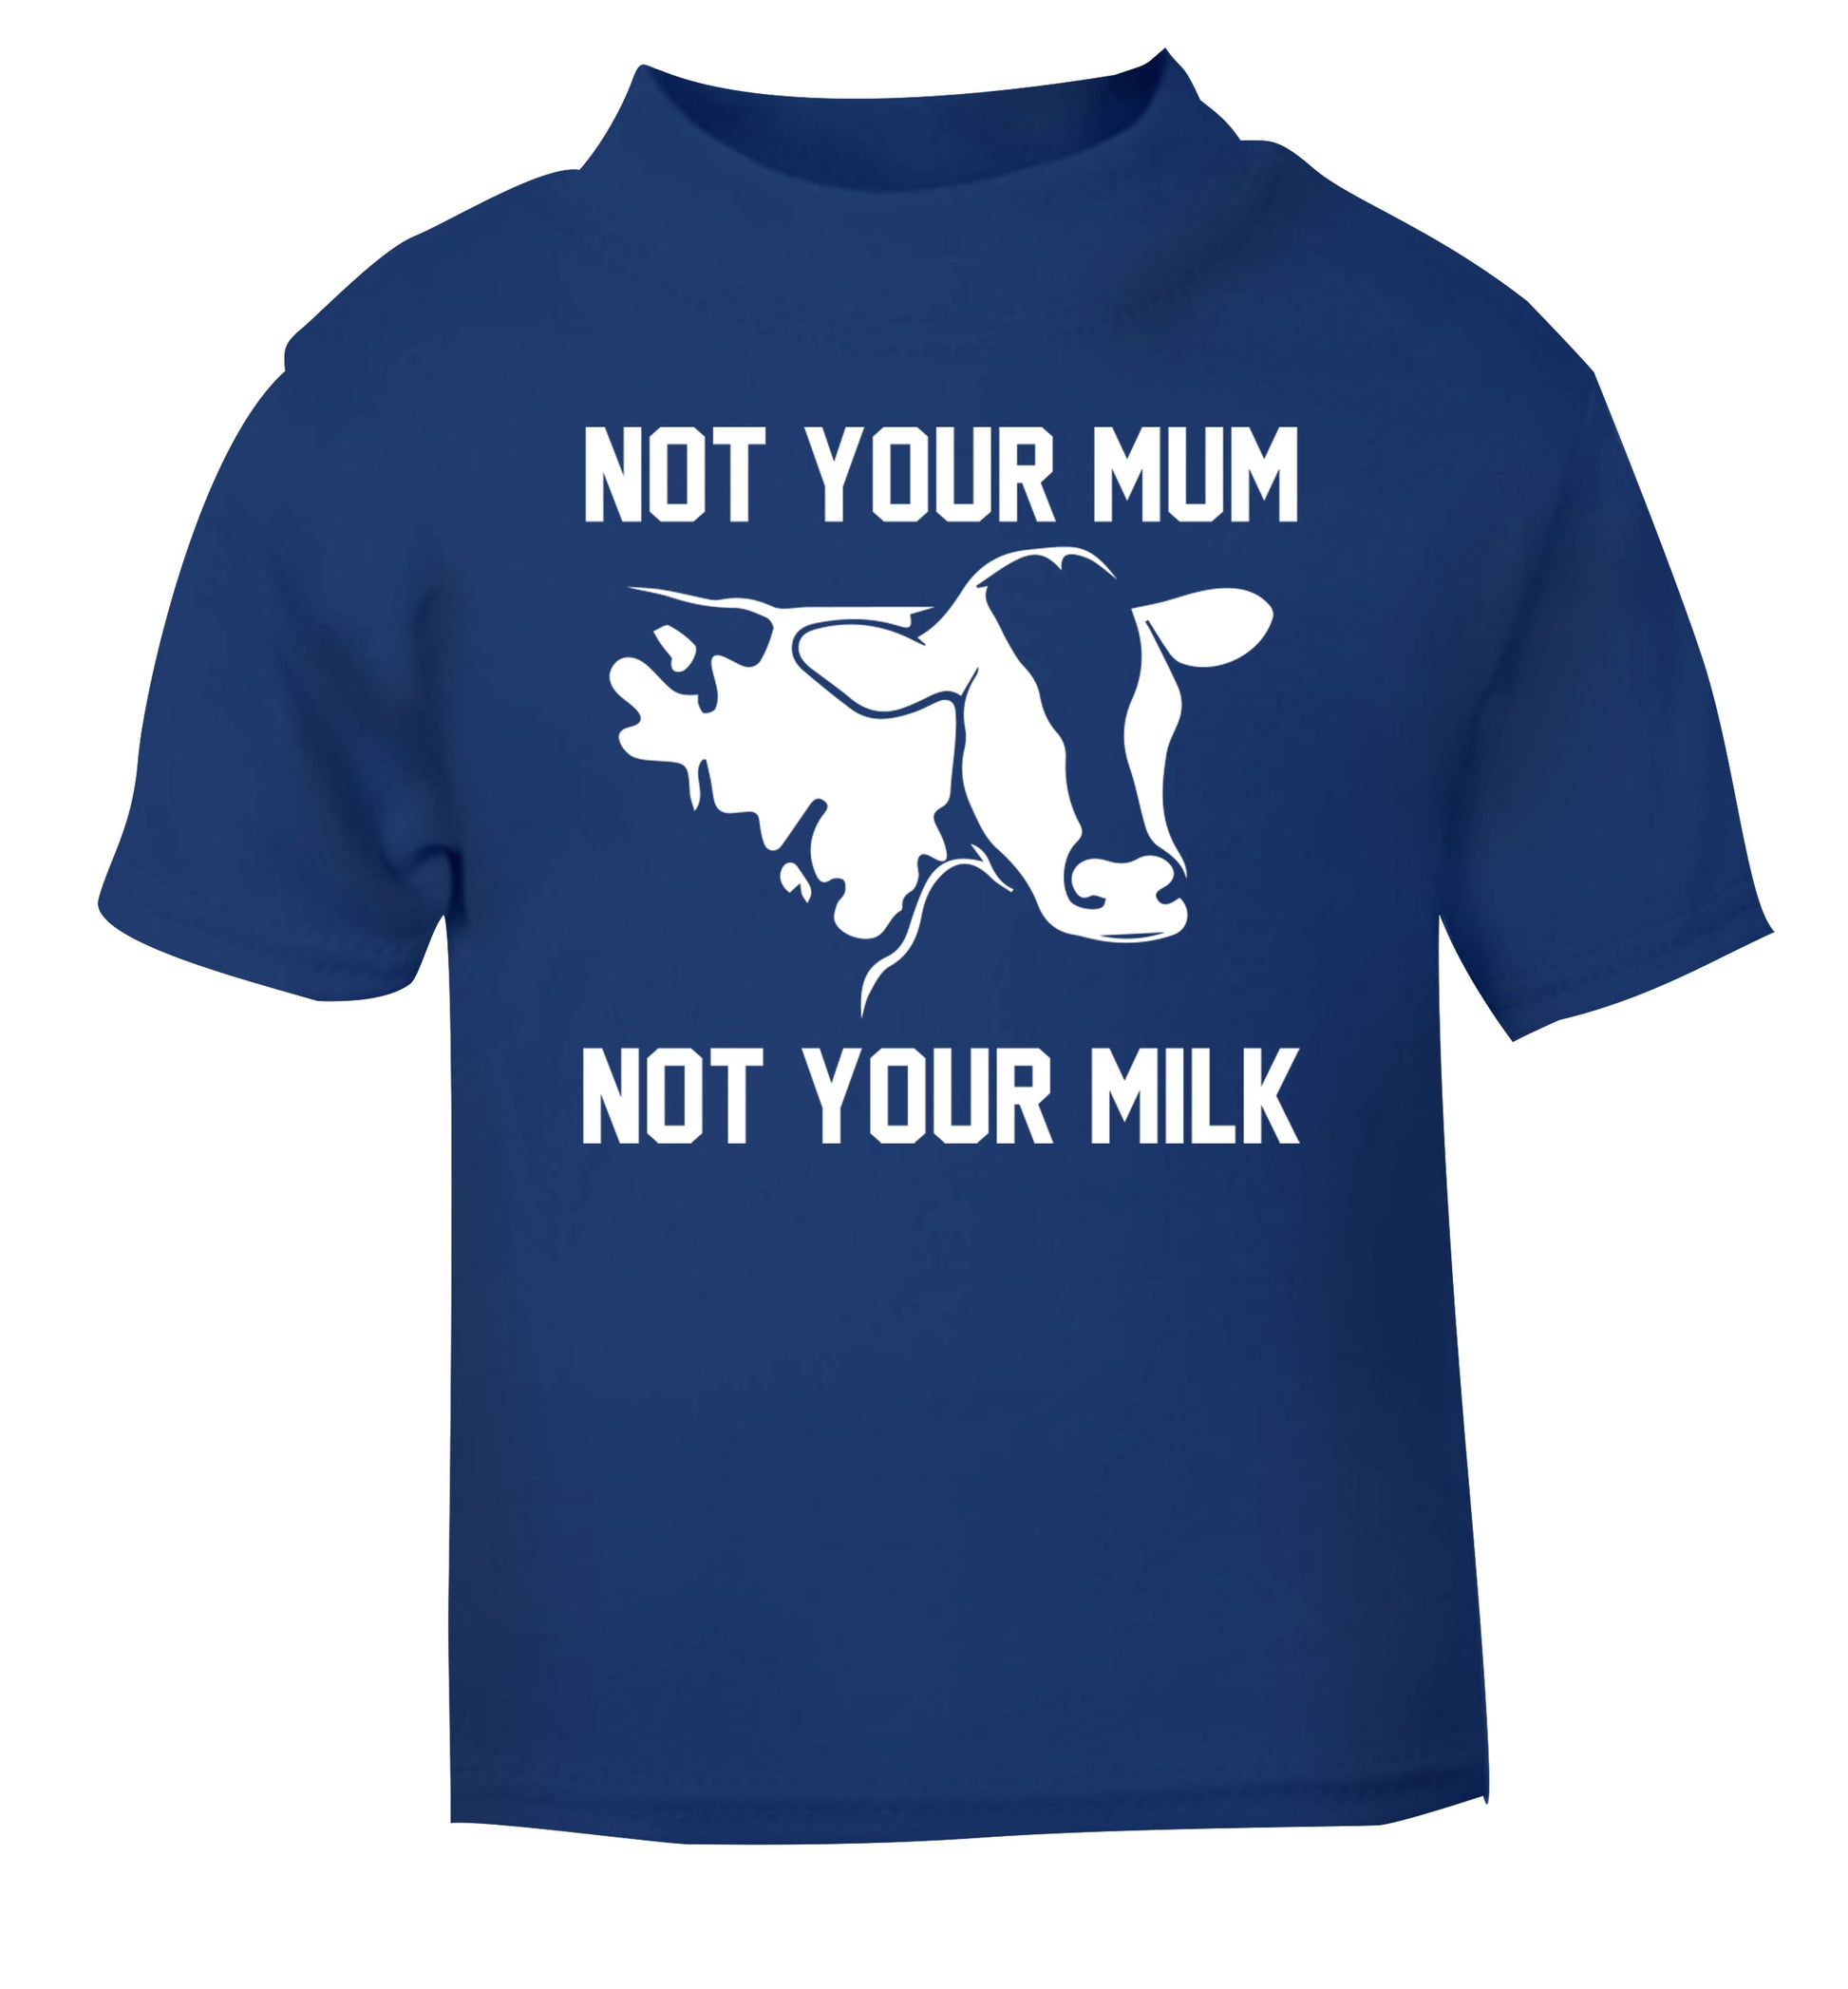 Not your mum not your milk blue Baby Toddler Tshirt 2 Years